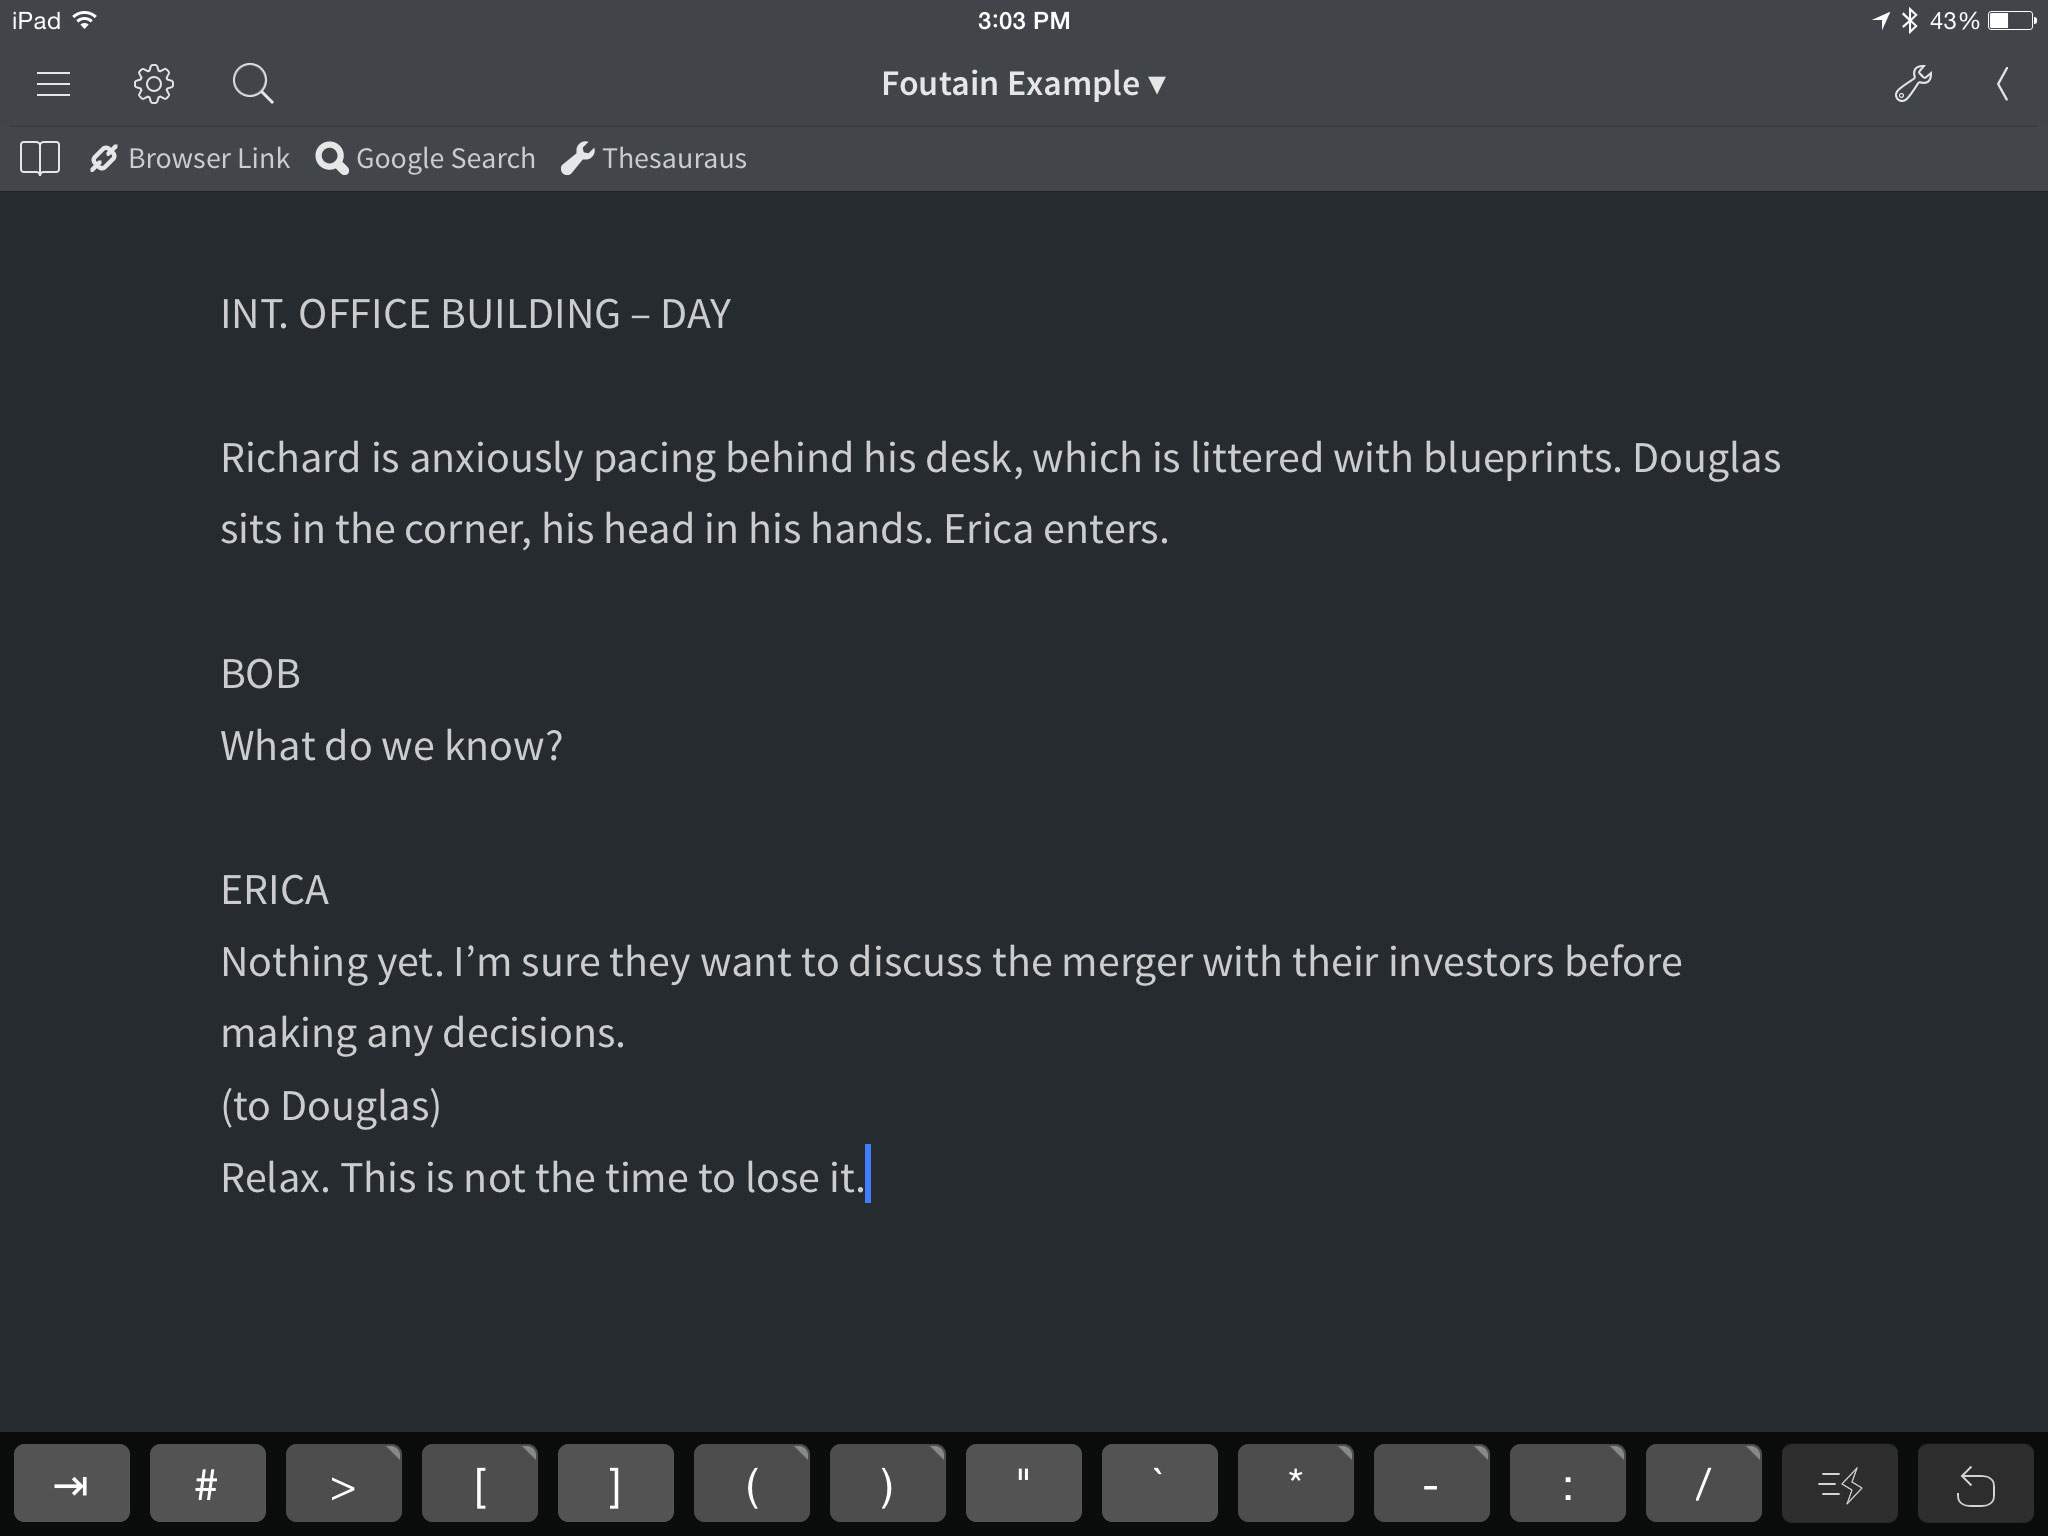 Screenplay snippet displayed on a tablet showing characters Richard, Bob, Douglas, and Erica in a tense business situation involving iThings screenplays.